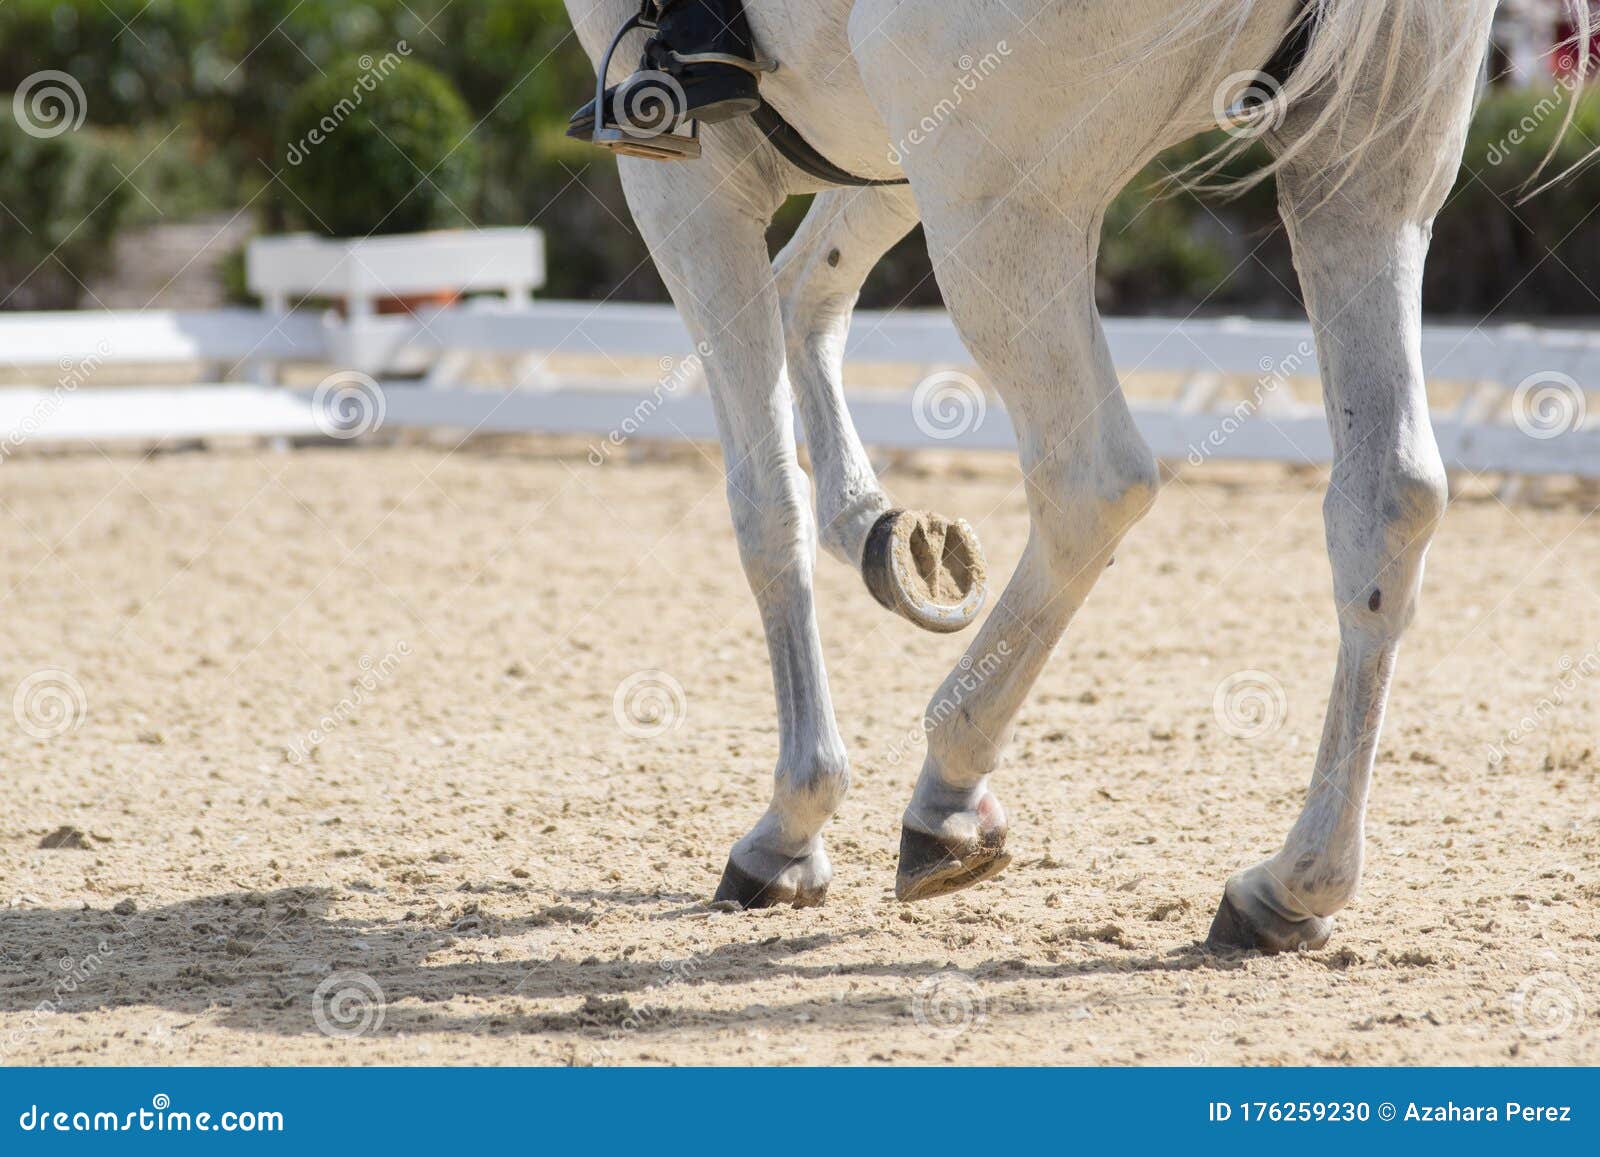 legs and hoofs of a mare in a dressage grand prix test